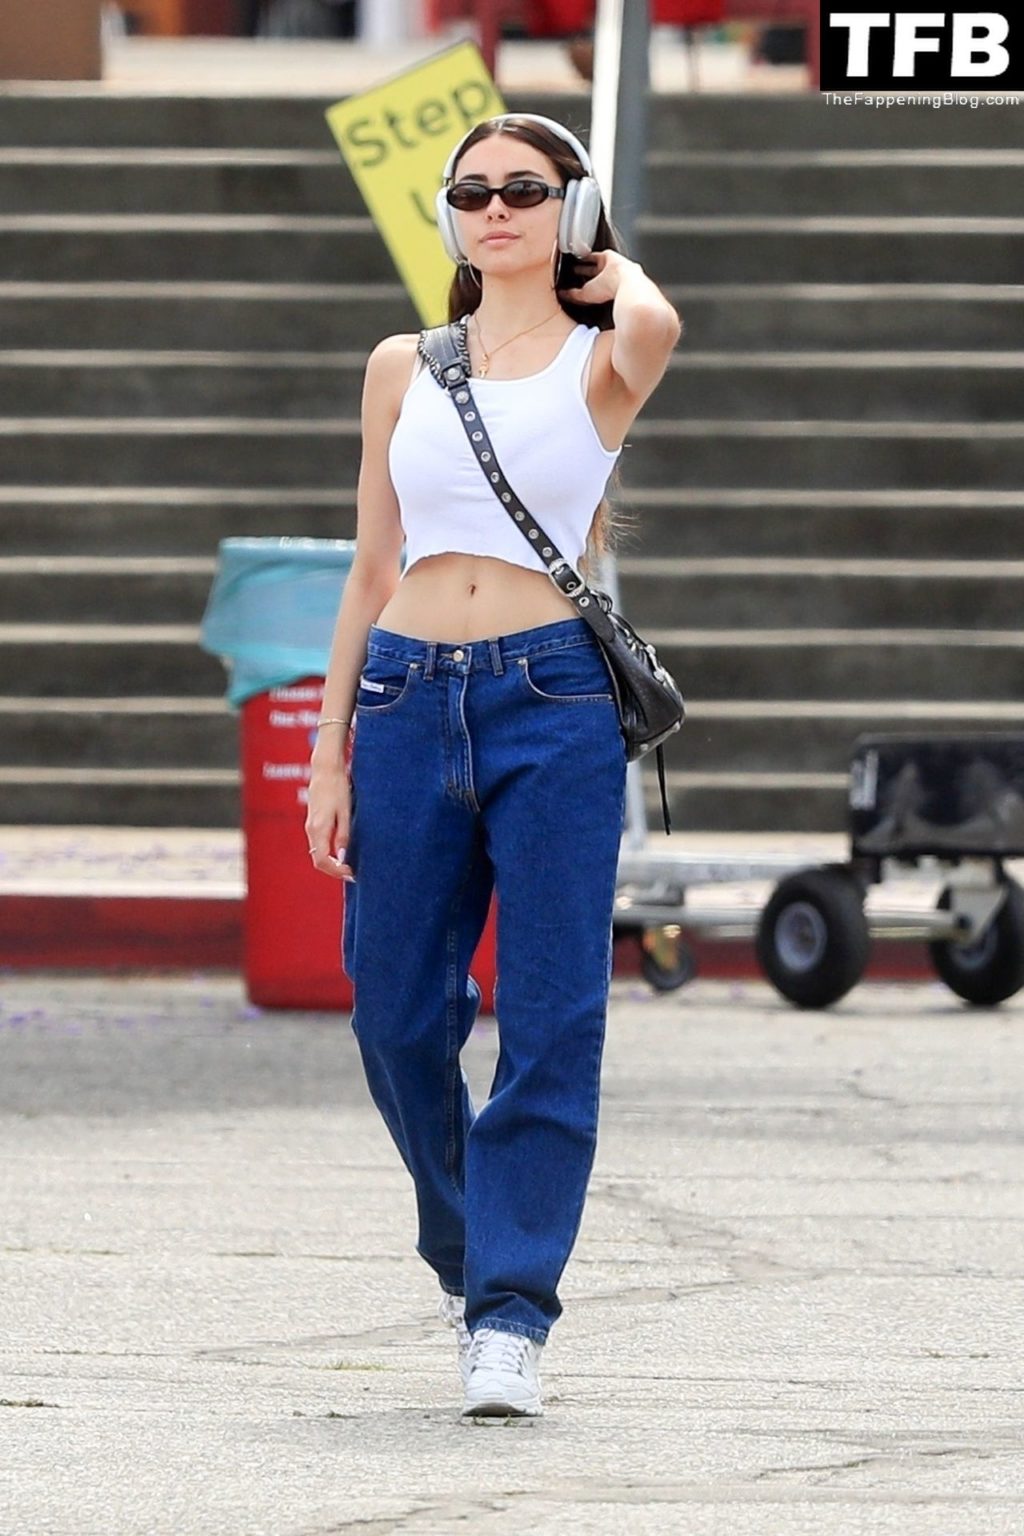 Madison Beer Sexy The Fappening Blog 18 1024x1536 - Madison Beer Wears a Tiny Crop Top Revealing a Toned Waist While Shopping in LA (39 Photos)